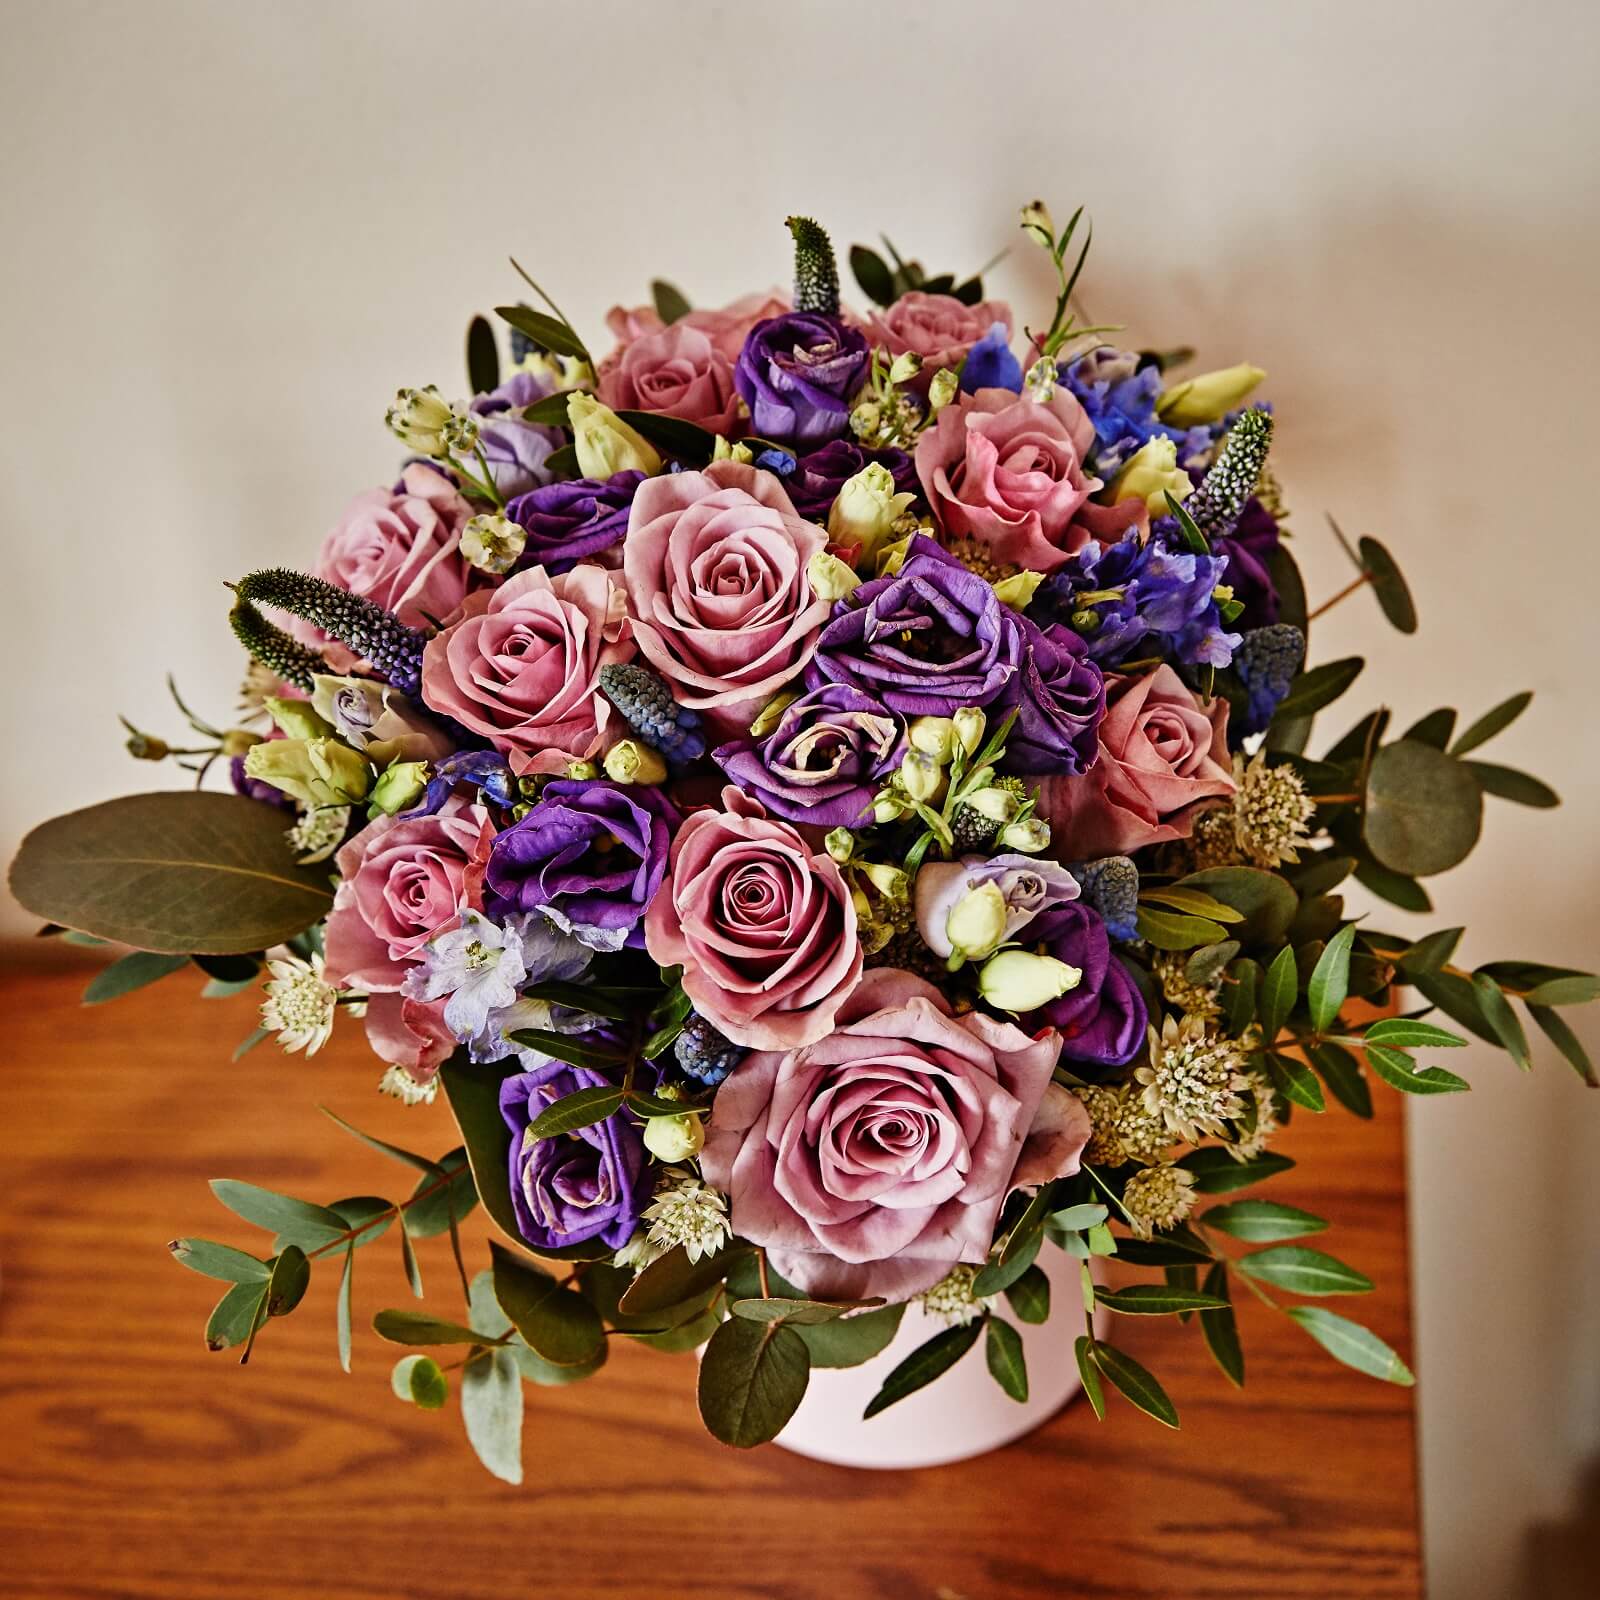 Wedding bouquet at Hotel Rangá filled with pink roses, purple blooms, green leaves and white accent flowers.